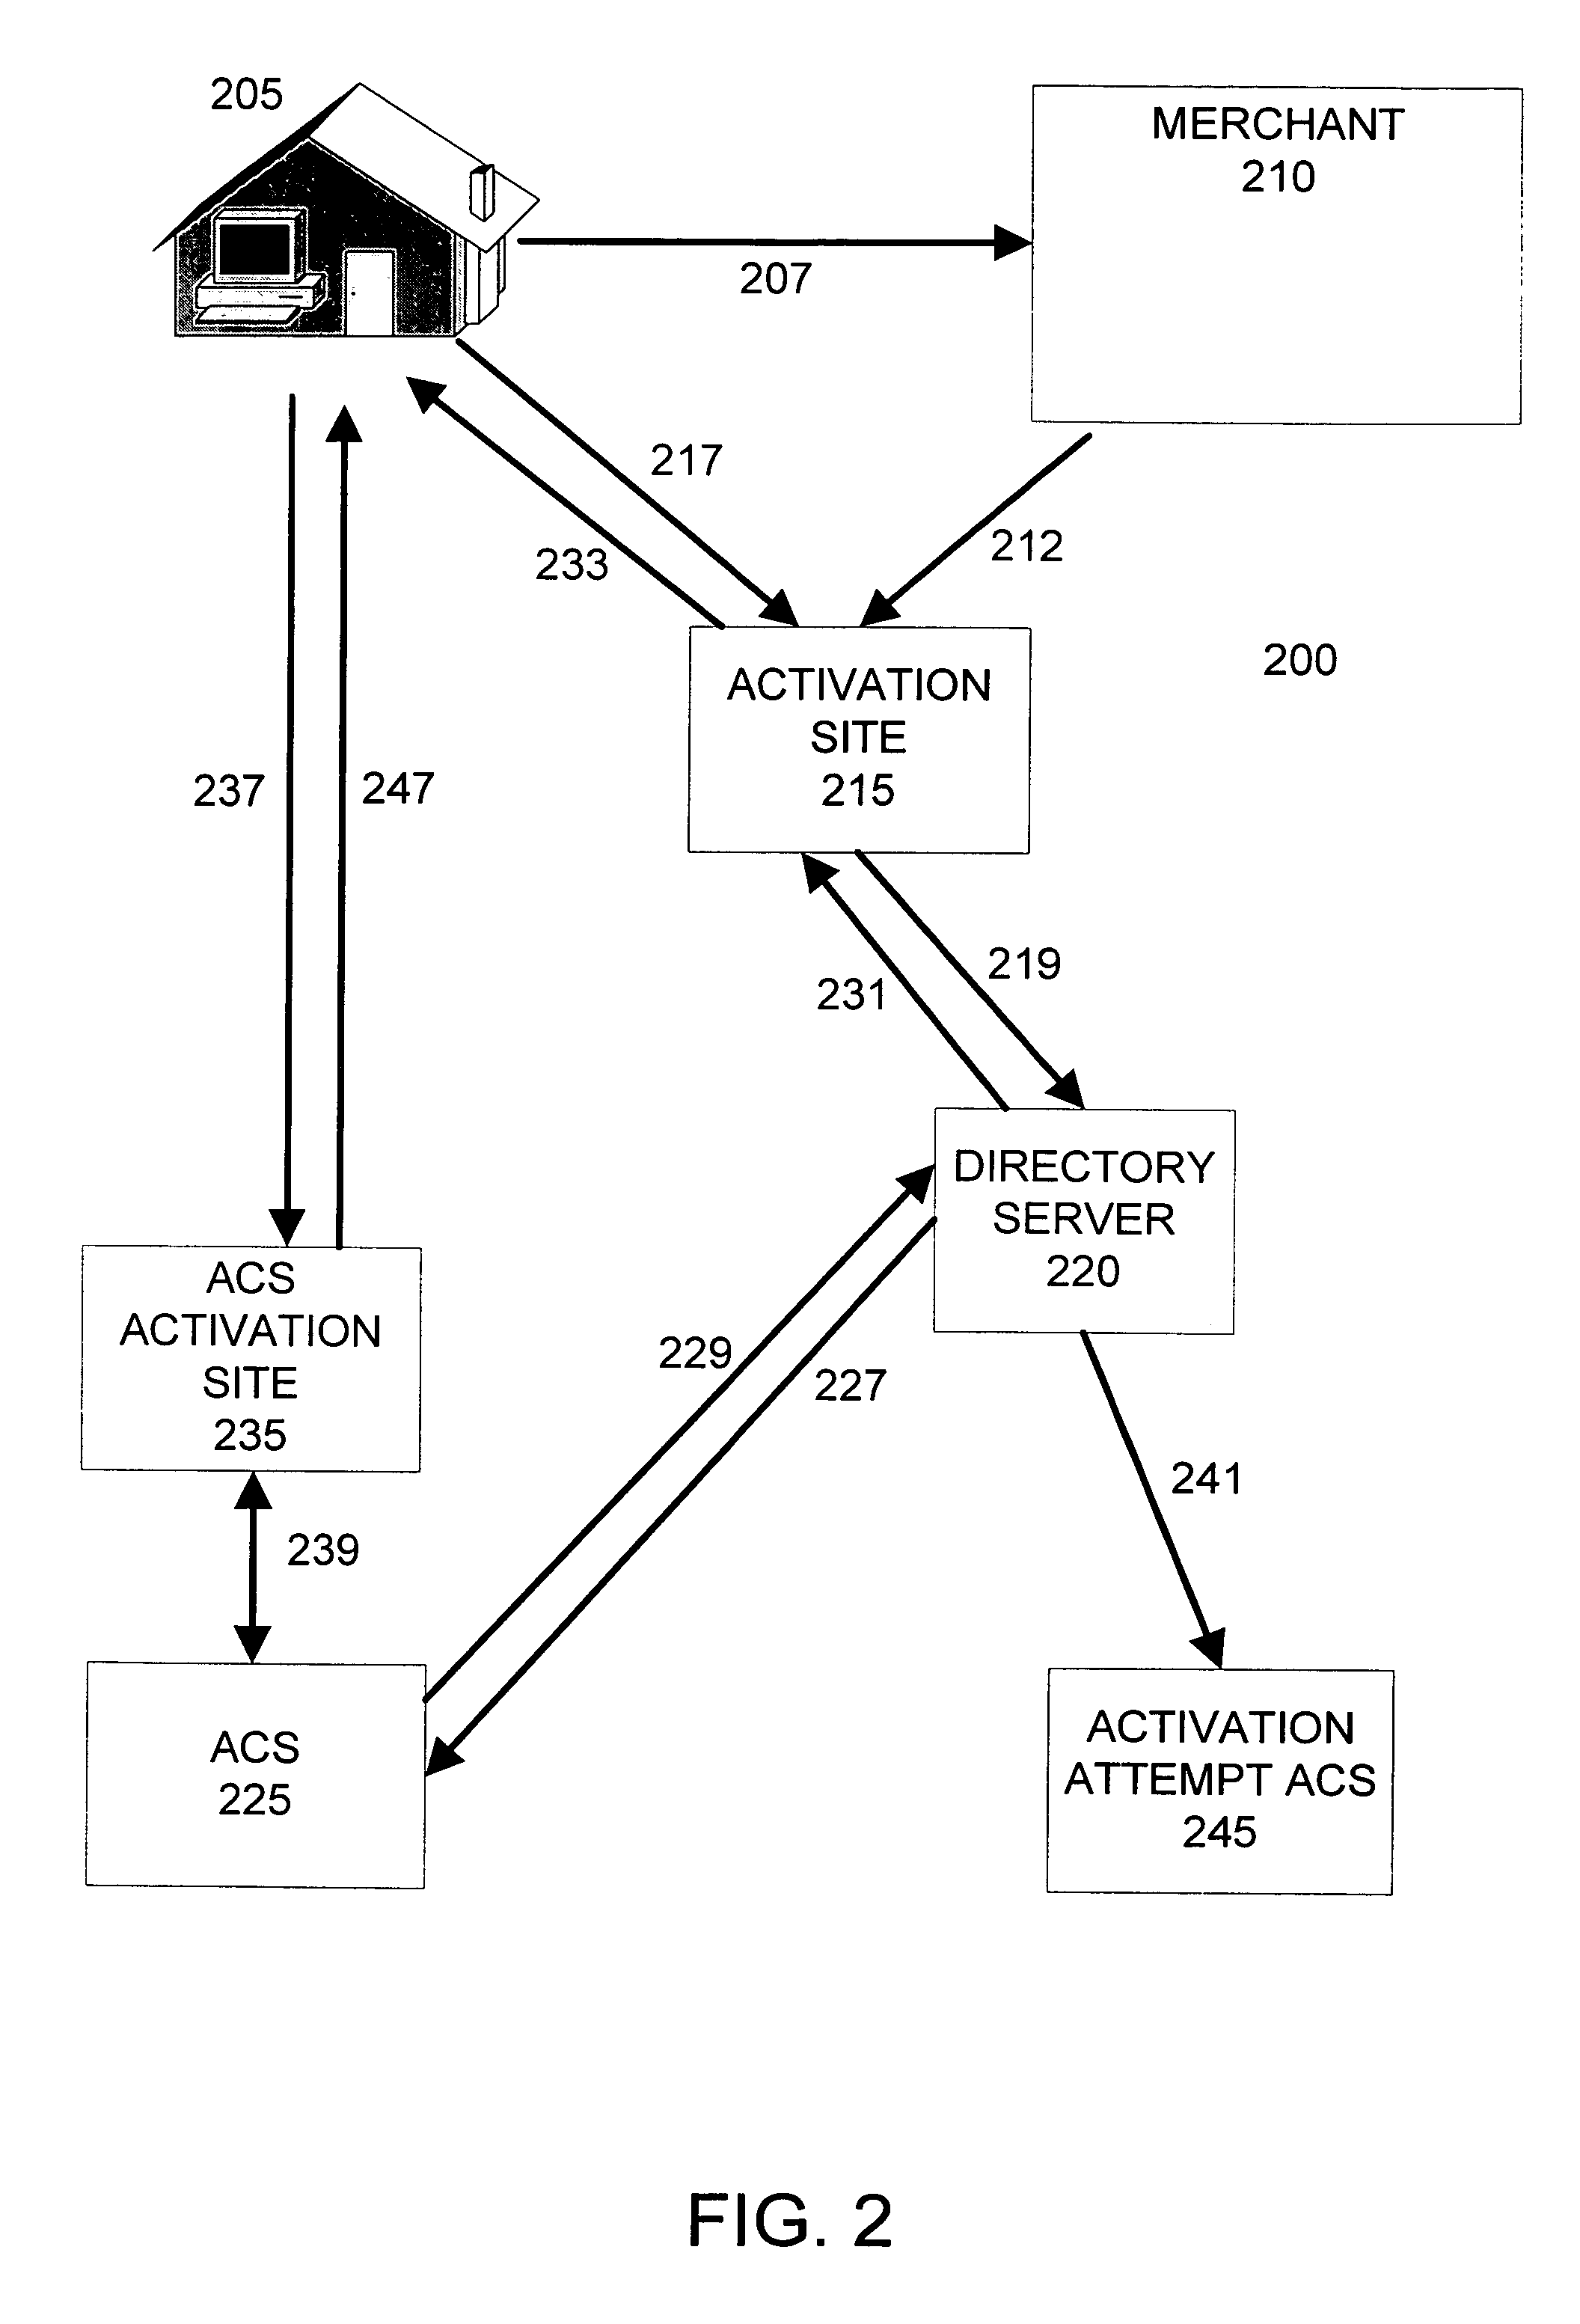 Managing activation of cardholders in a secure authentication program